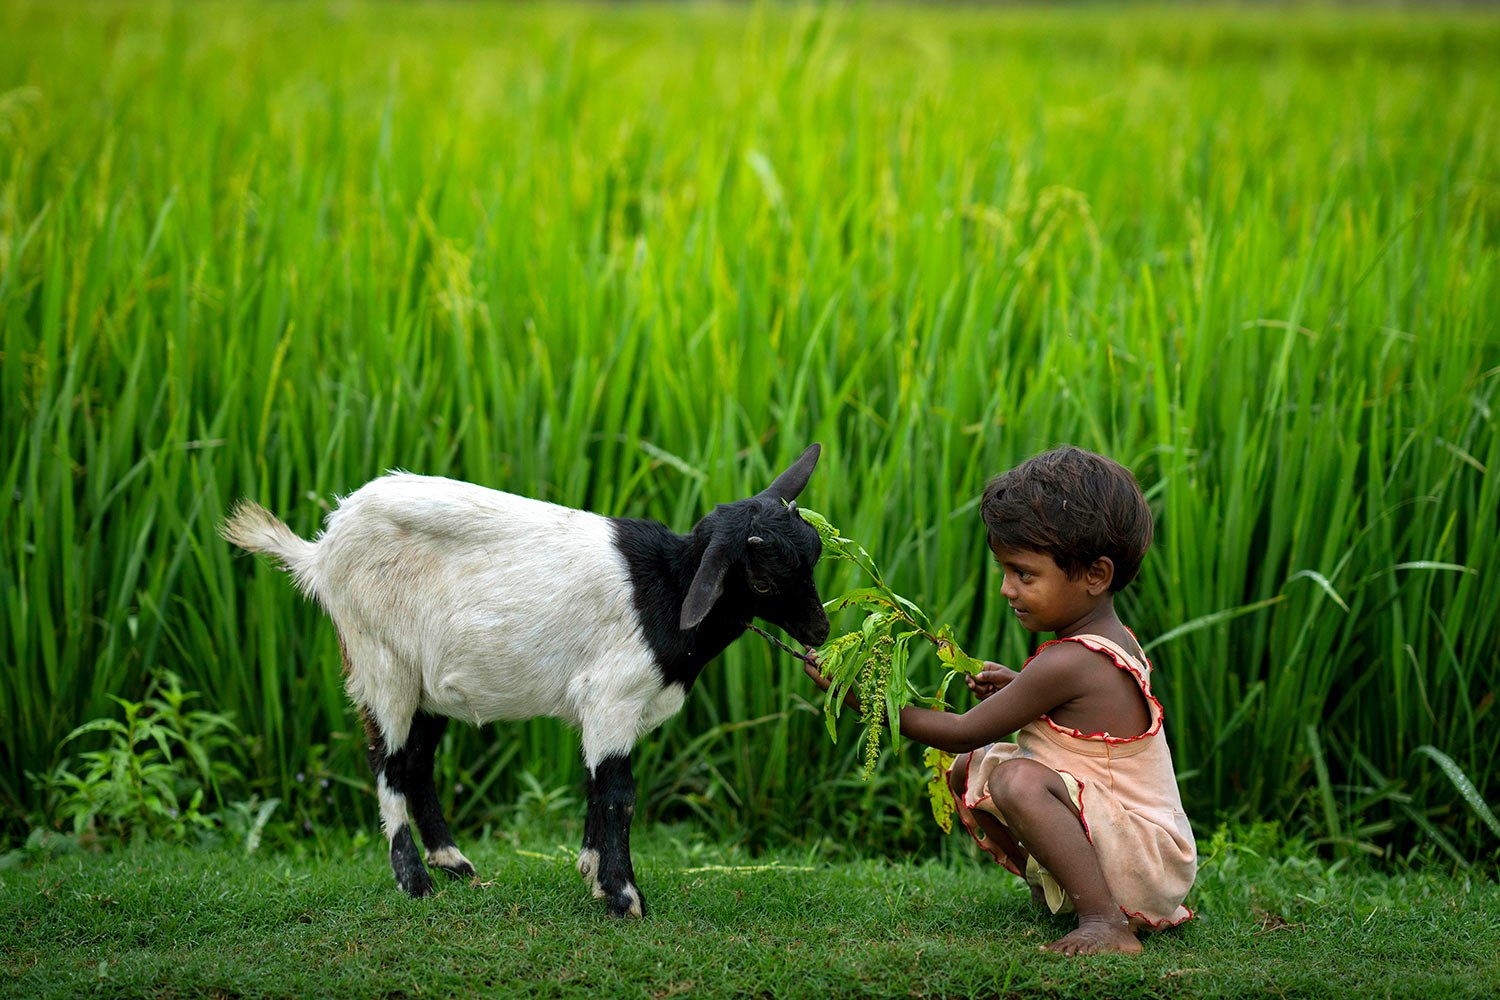  A nomadic girl feeds a goat on the outskirts of Gauhati, India, Saturday, April 30, 2022. (AP Photo/Anupam Nath) 